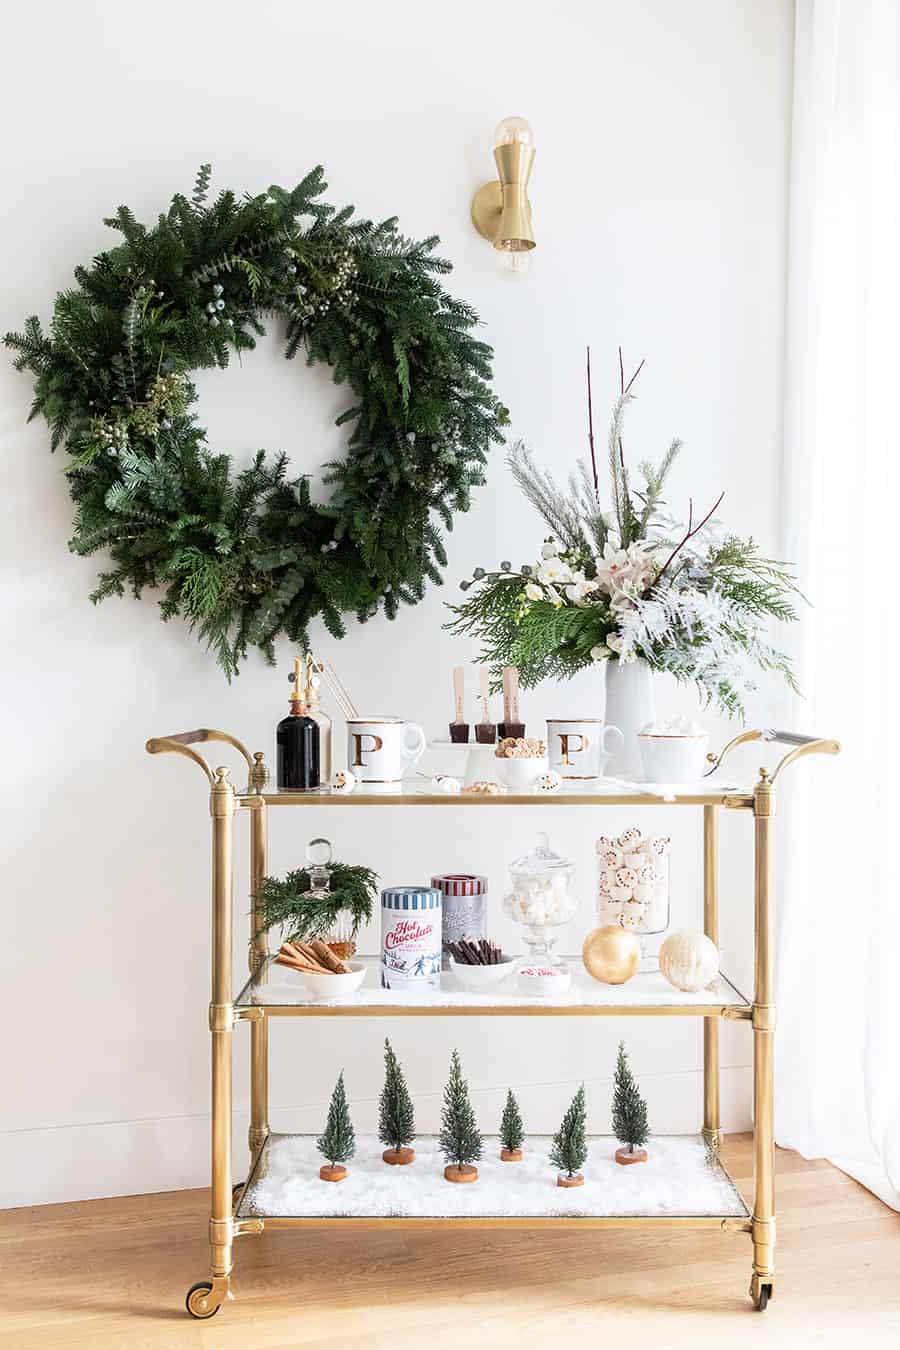 Hot chocolate bar on a gold bar cart with a wreath on the wall.